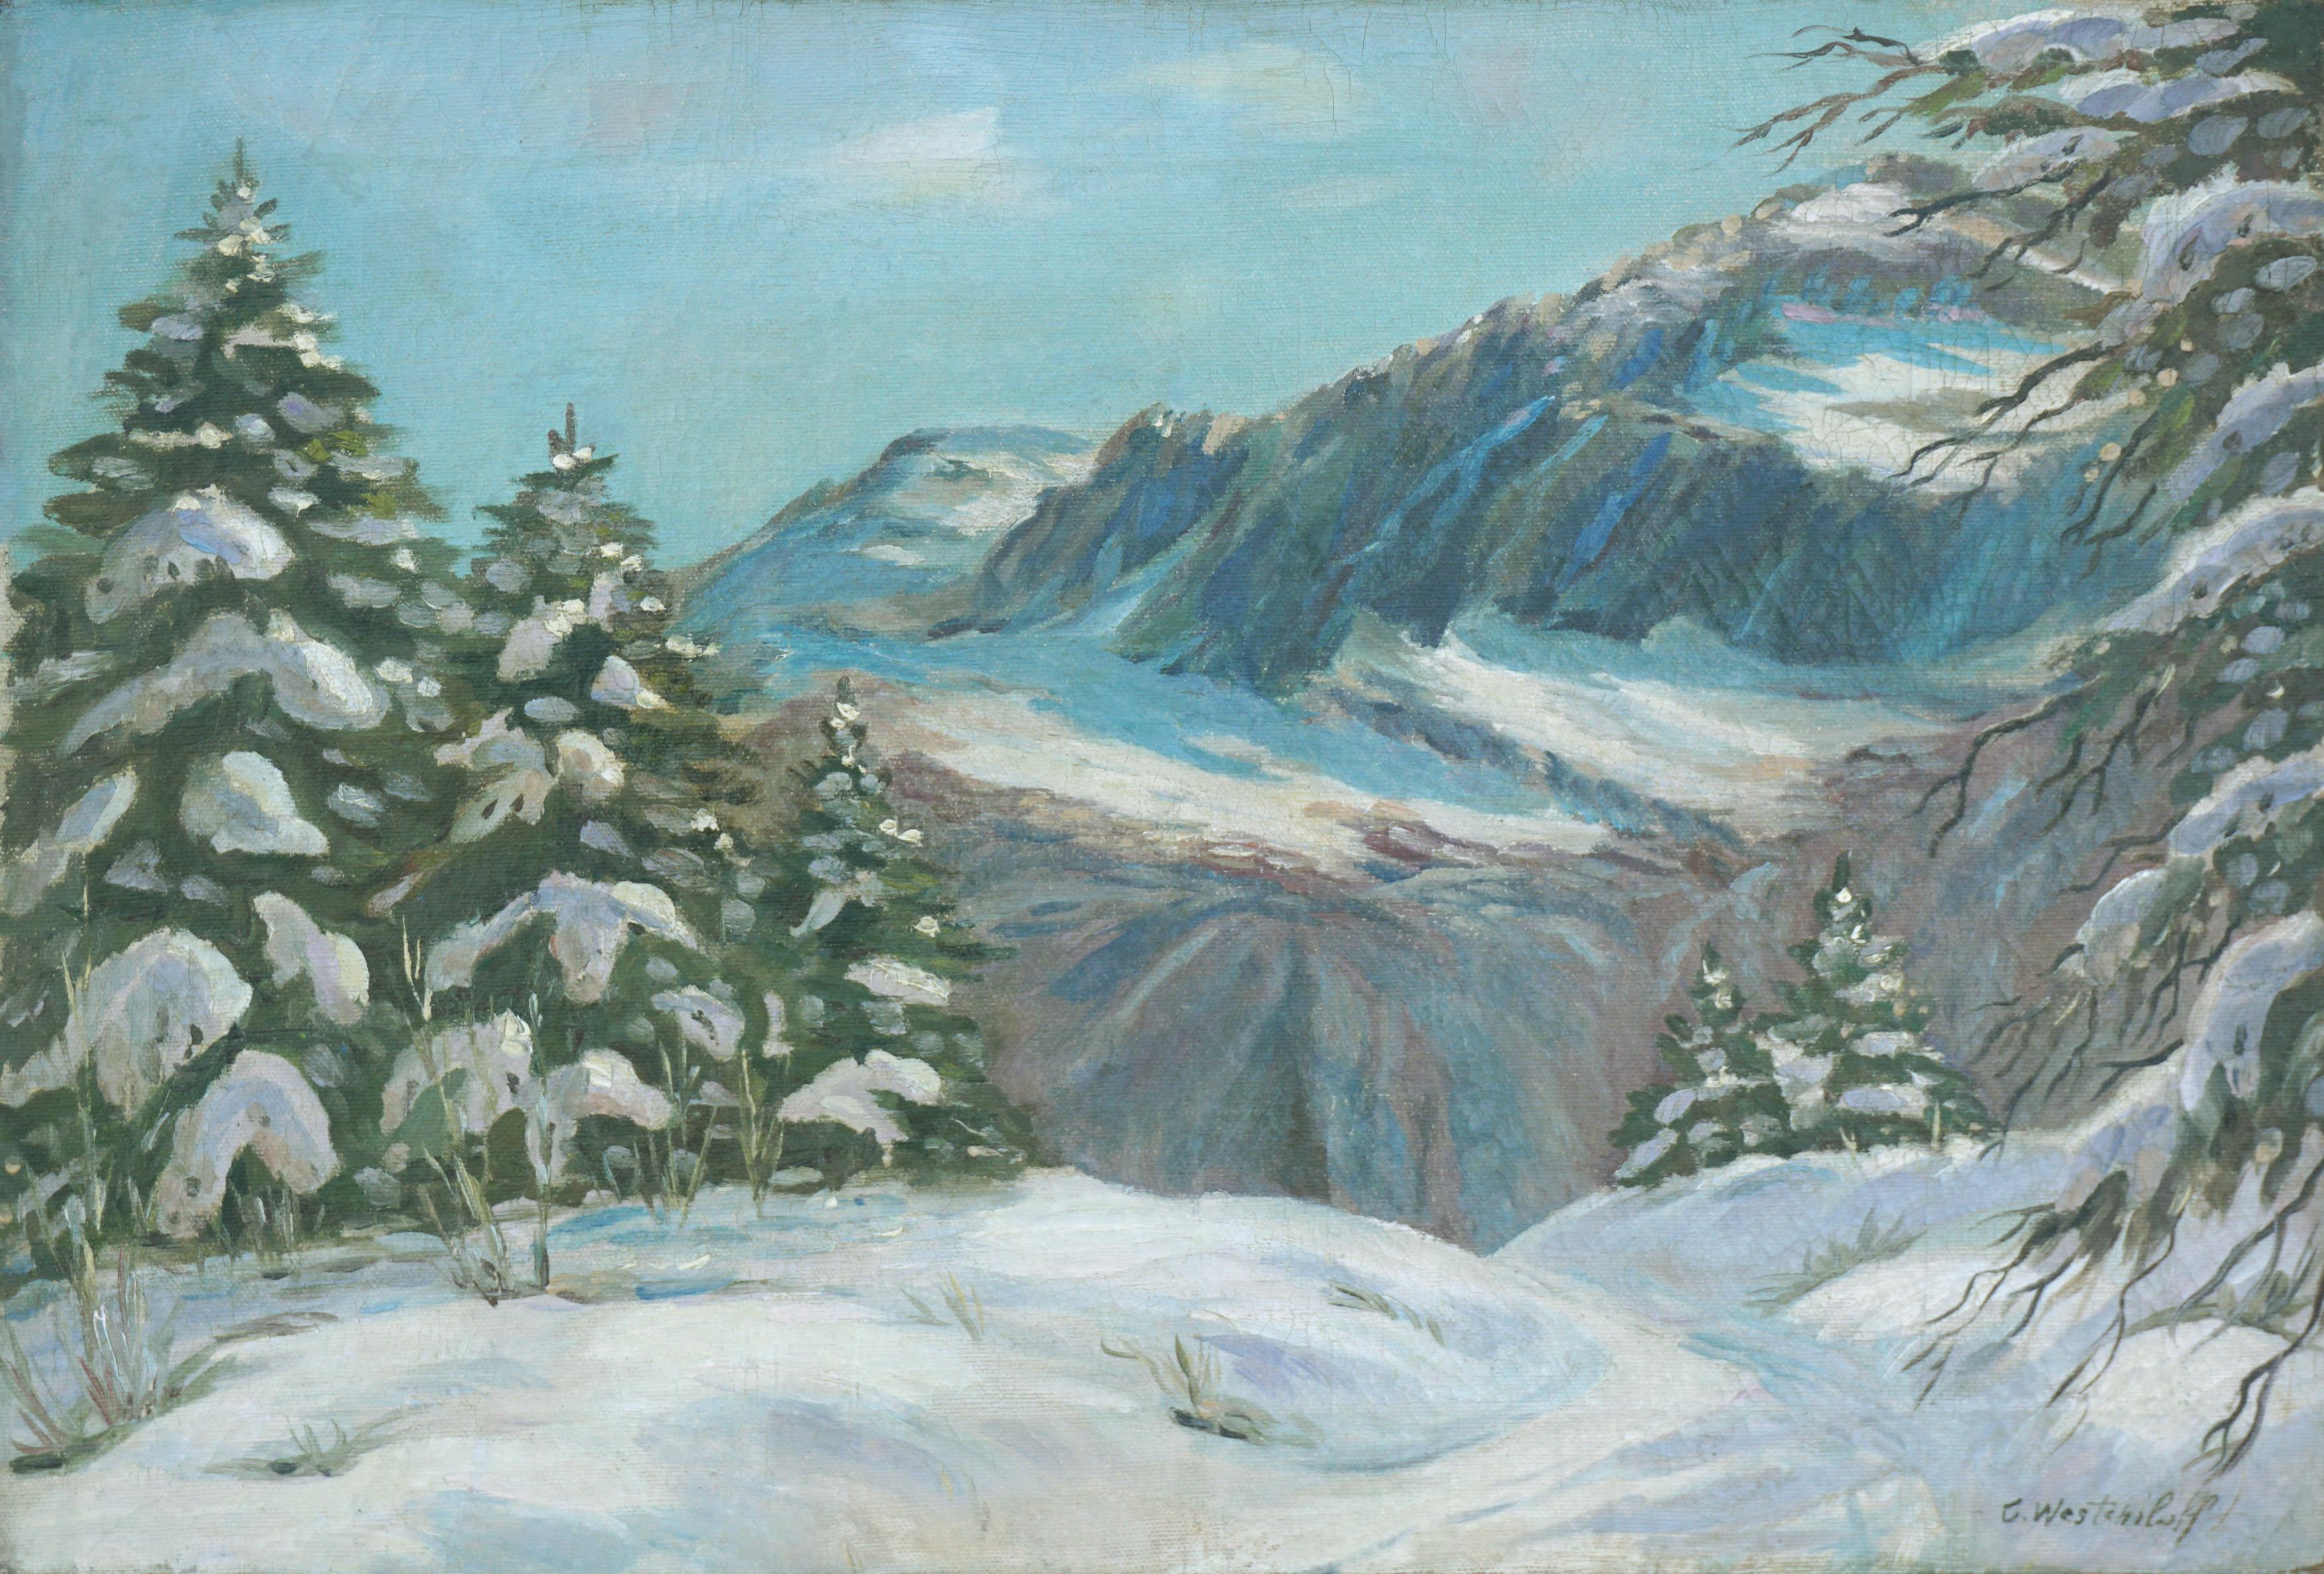 Late 19th Century Landscape - "After The Snow" 